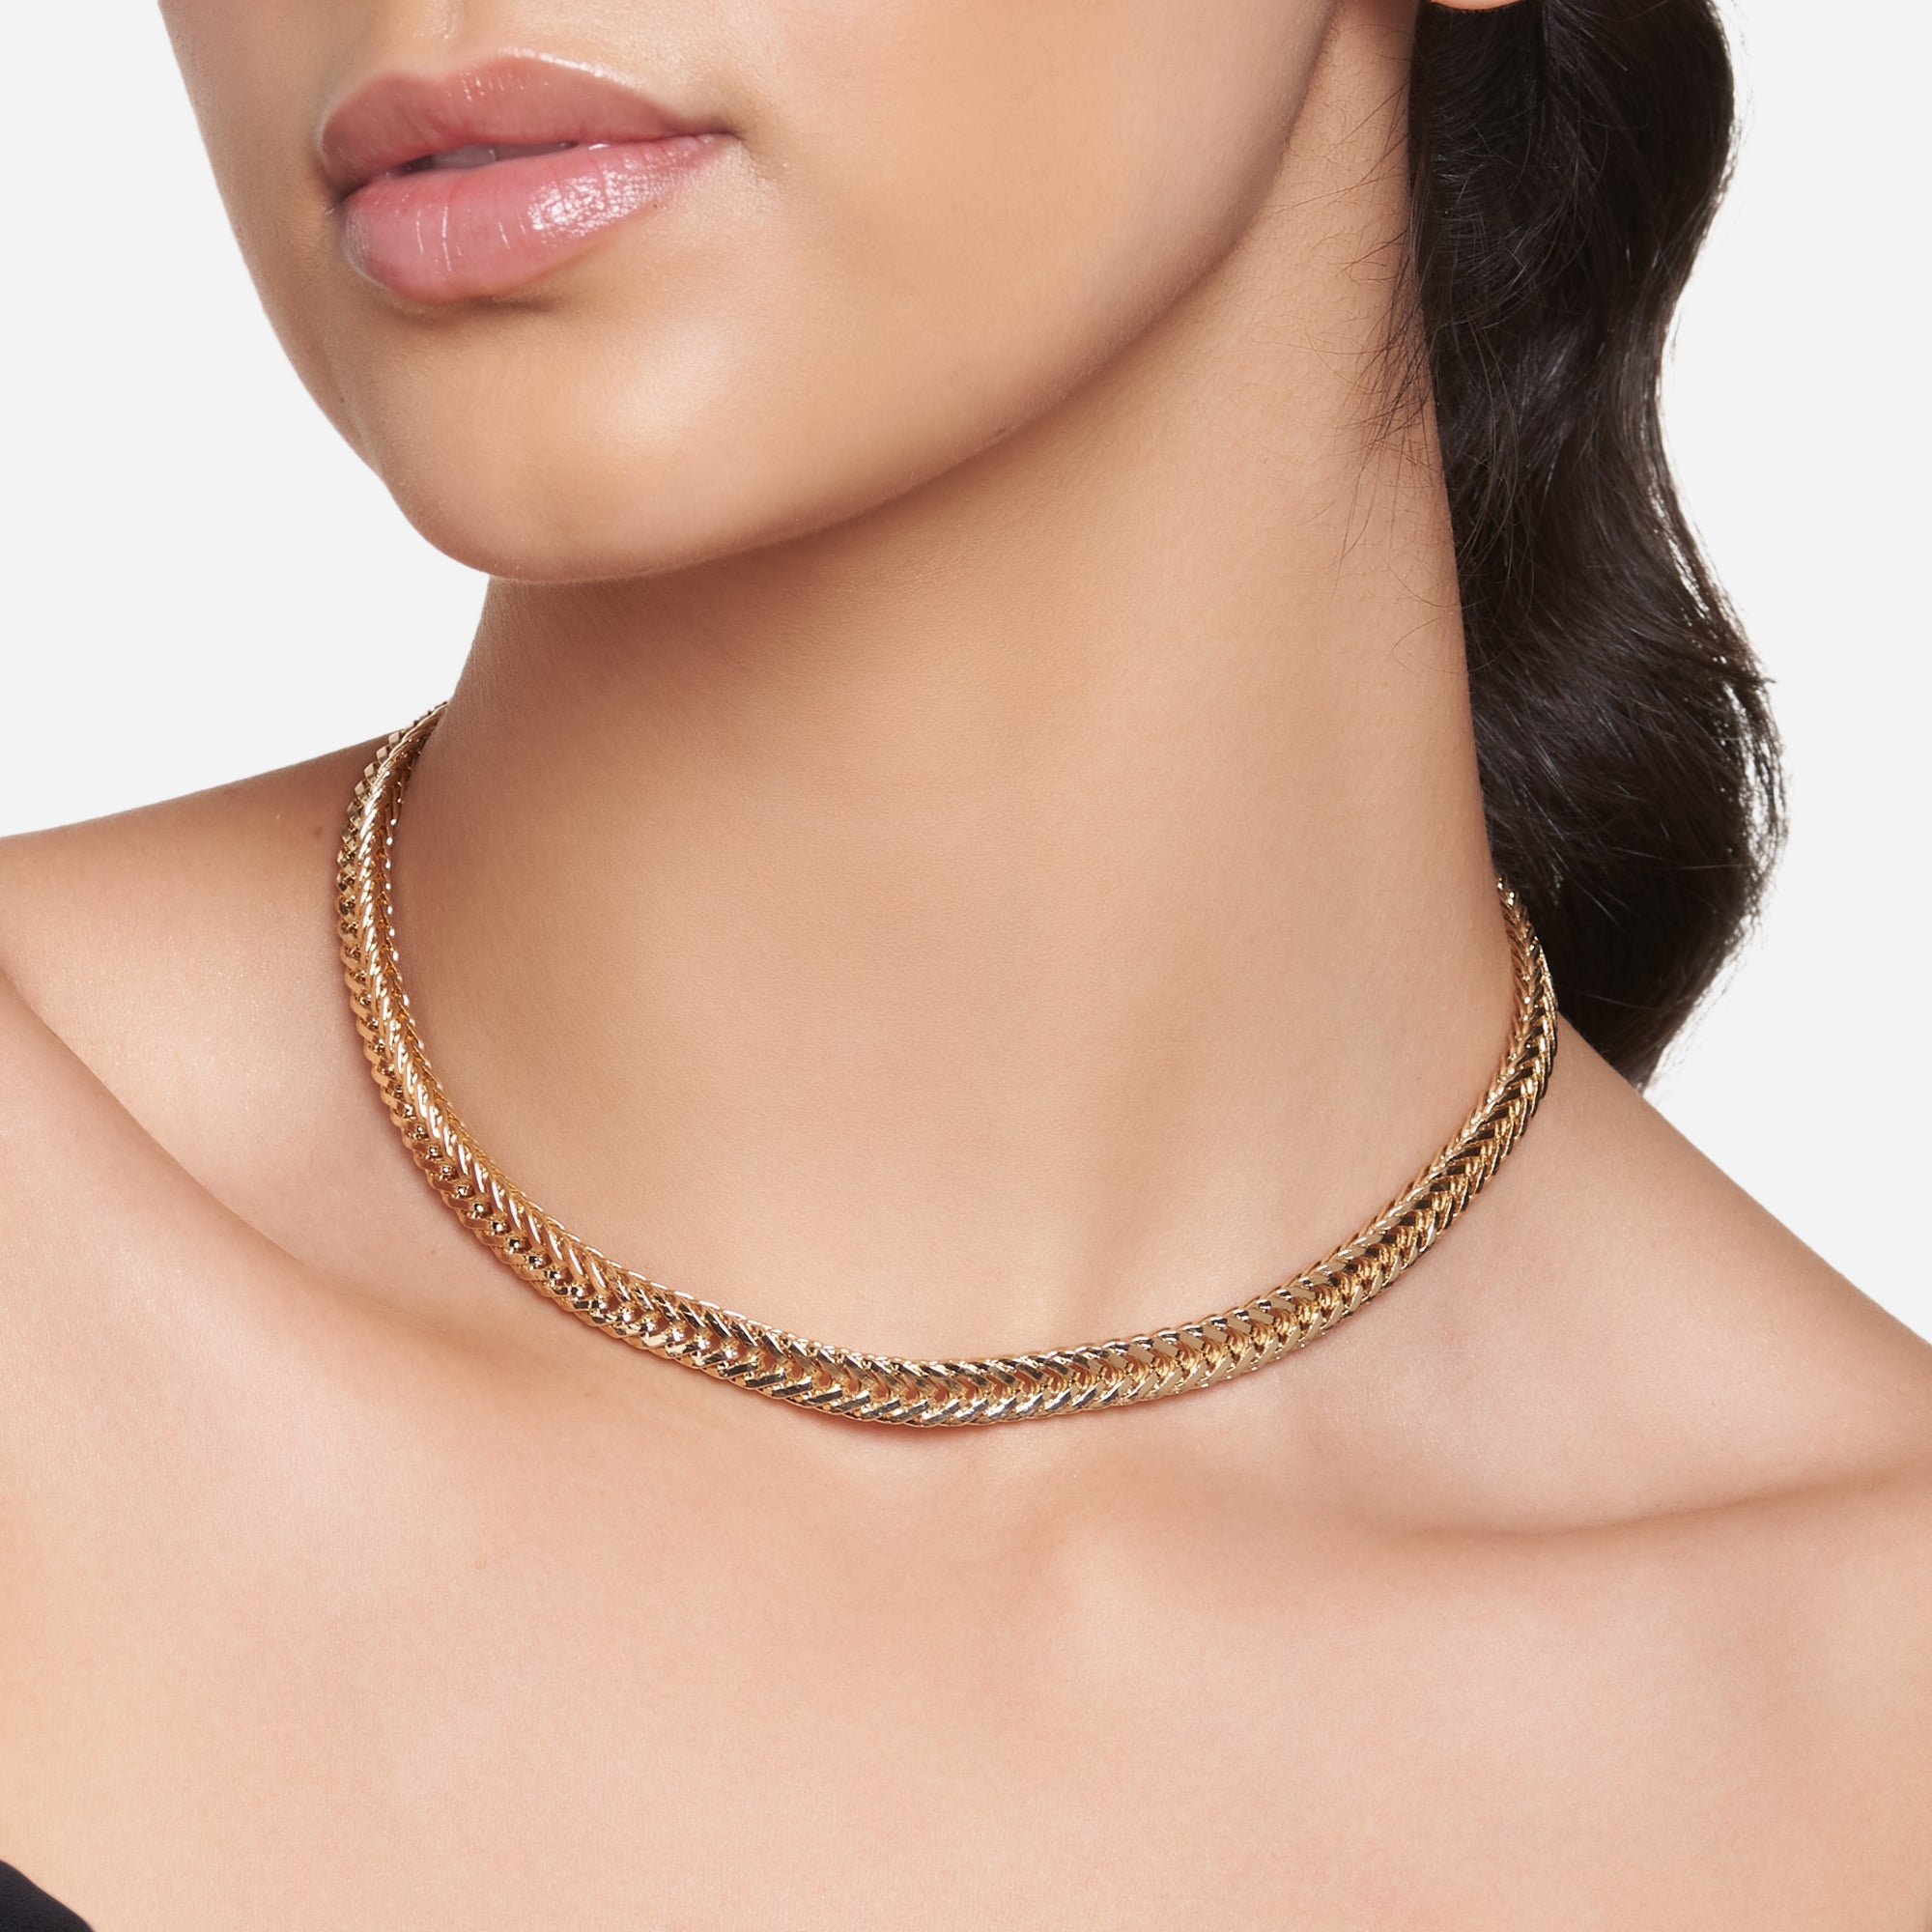 Accessorize London Women's Gold Weaved Chain Necklace